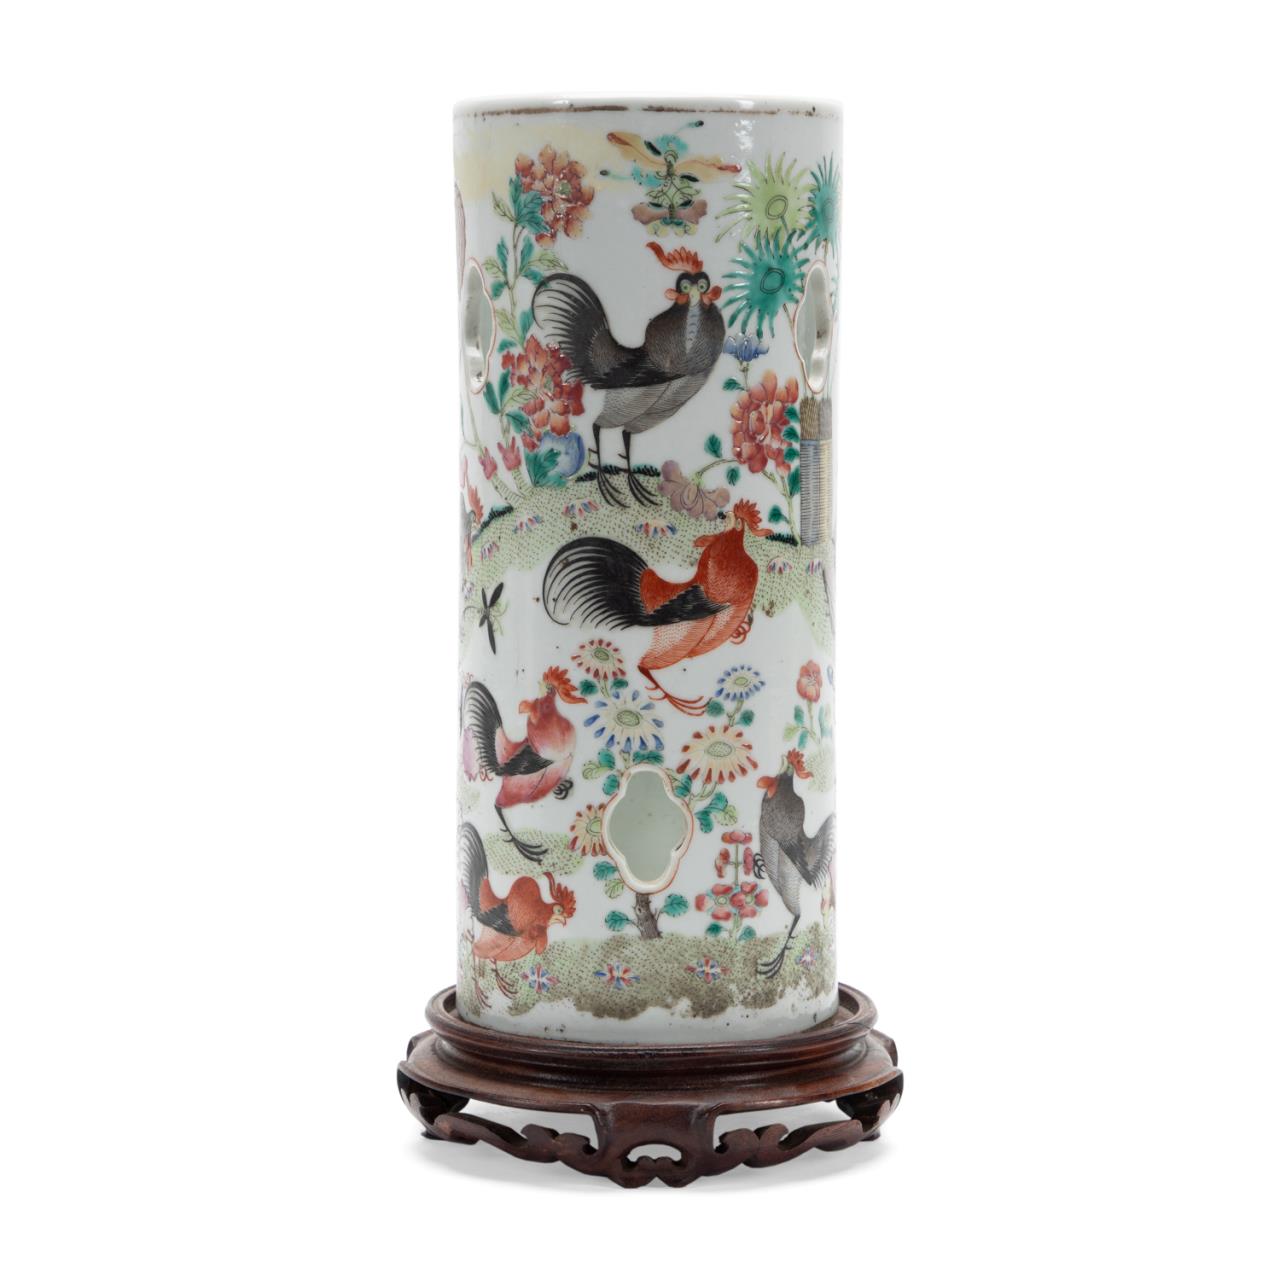 CHINESE FAMILLE ROSE ROOSTER PORCELAIN